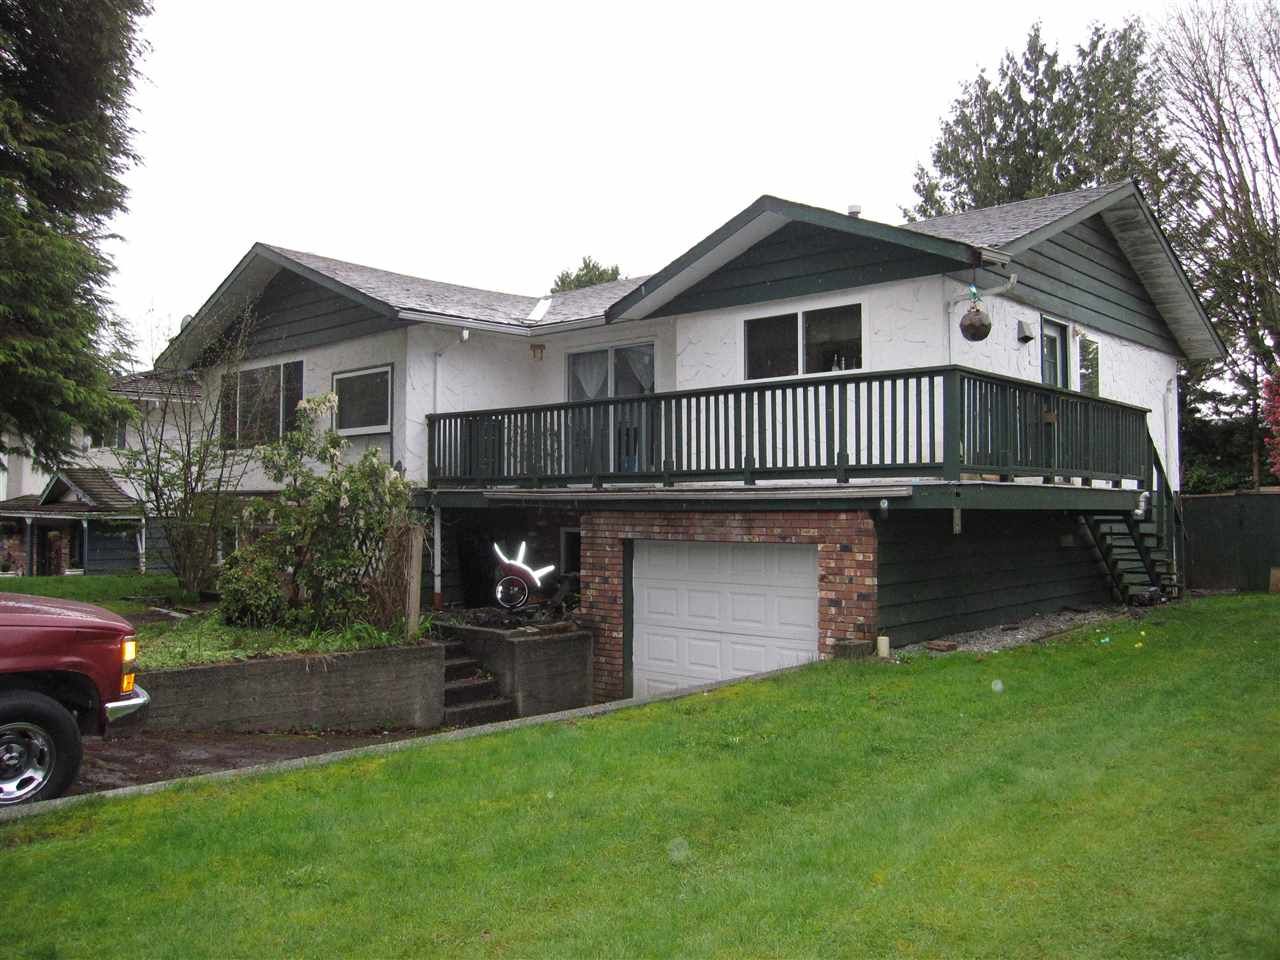 Main Photo: 11679 MORRIS Street in Maple Ridge: West Central House for sale : MLS®# R2157494